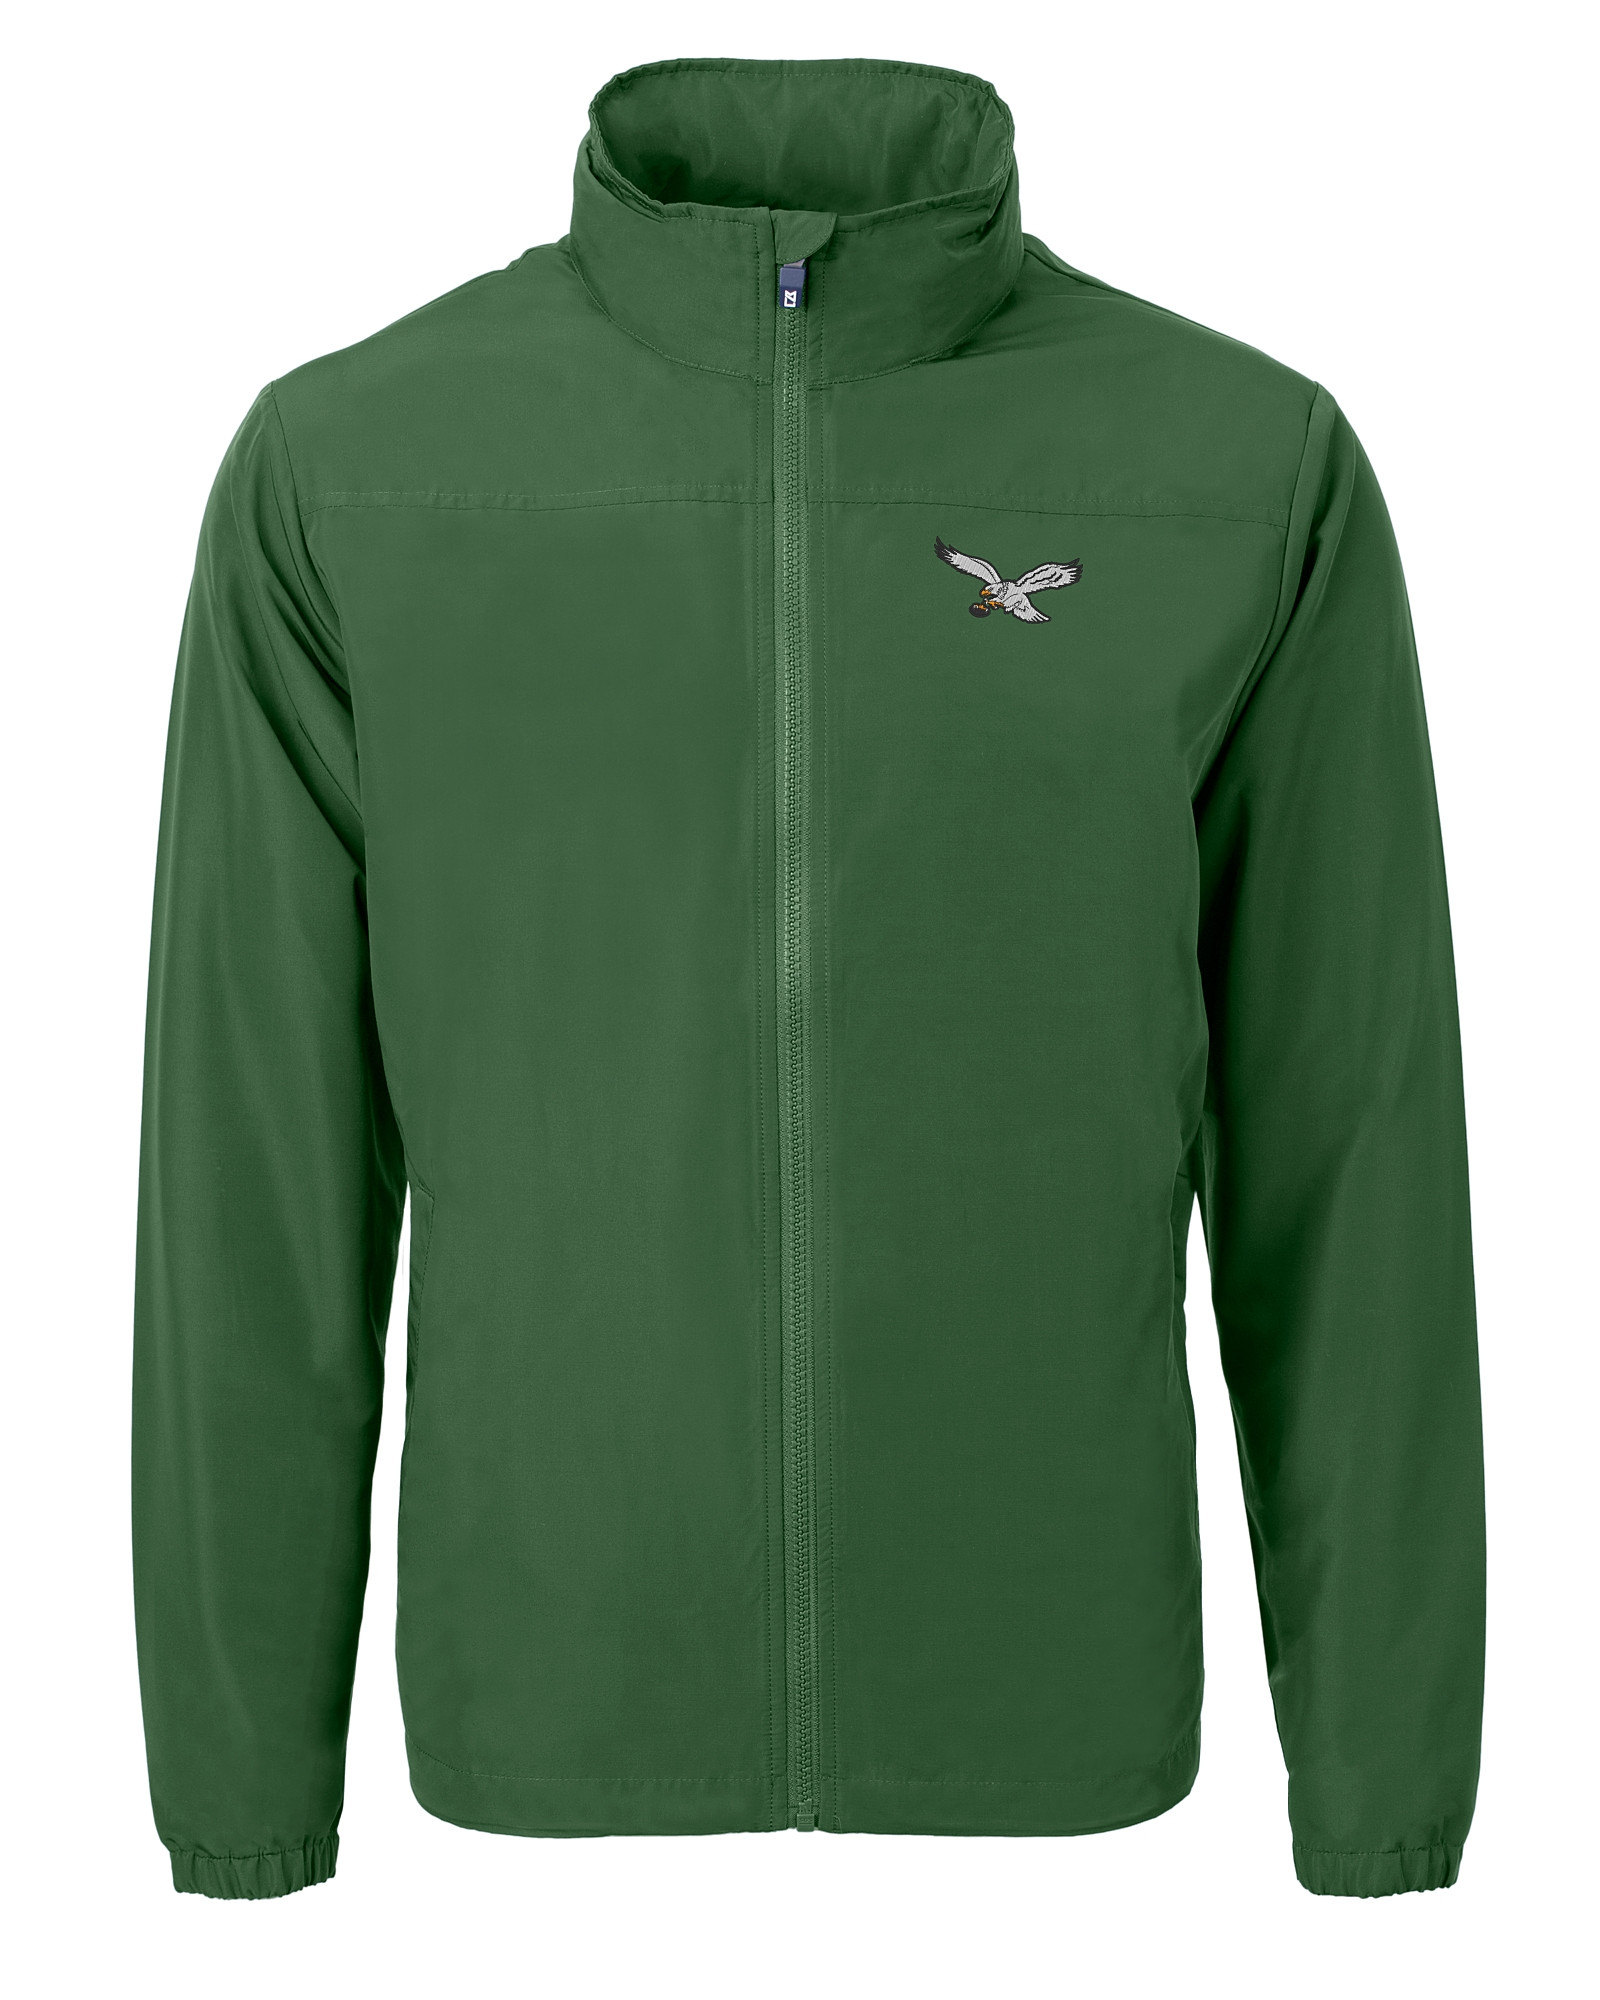 Official Philadelphia Eagles Clothing  Sweaters, Jackets, Polos & Vests  for Men & Women - Cutter & Buck